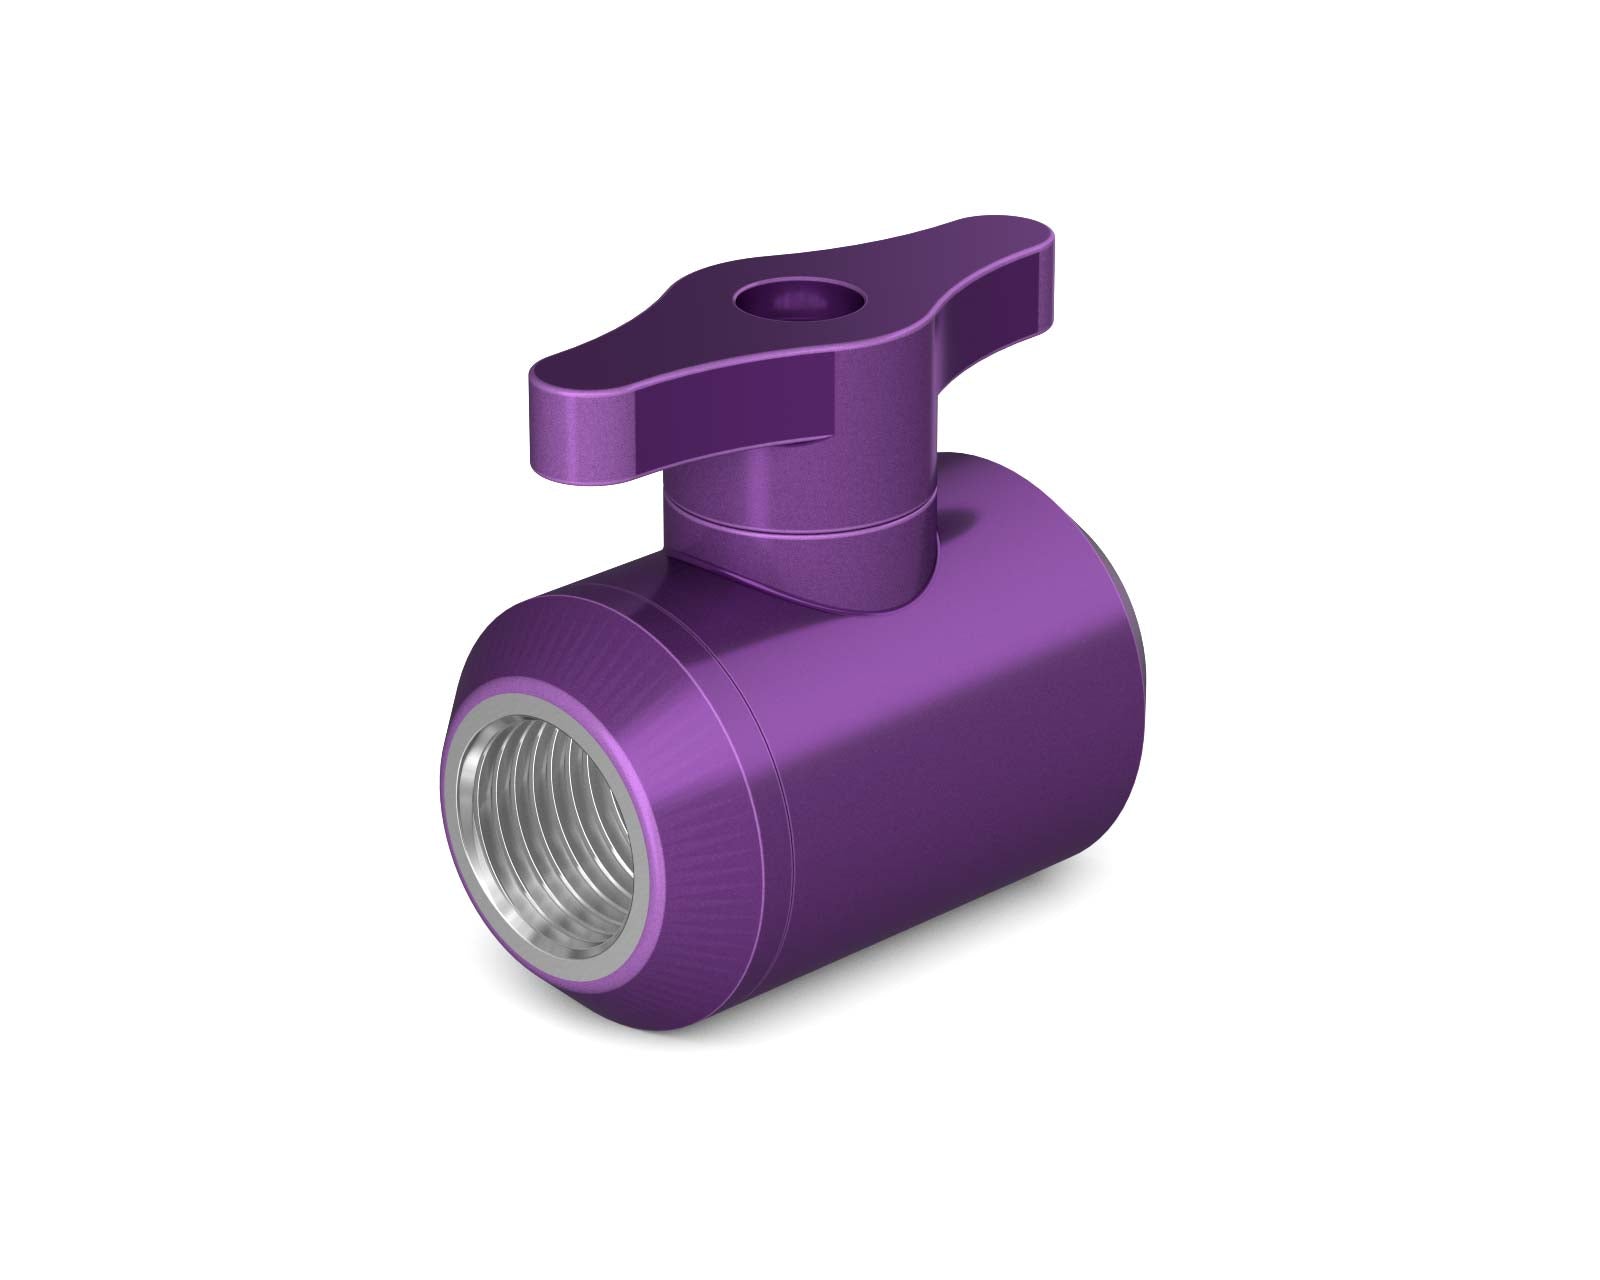 PrimoChill Female to Female G 1/4 Drain Ball Valve - PrimoChill - KEEPING IT COOL Candy Purple